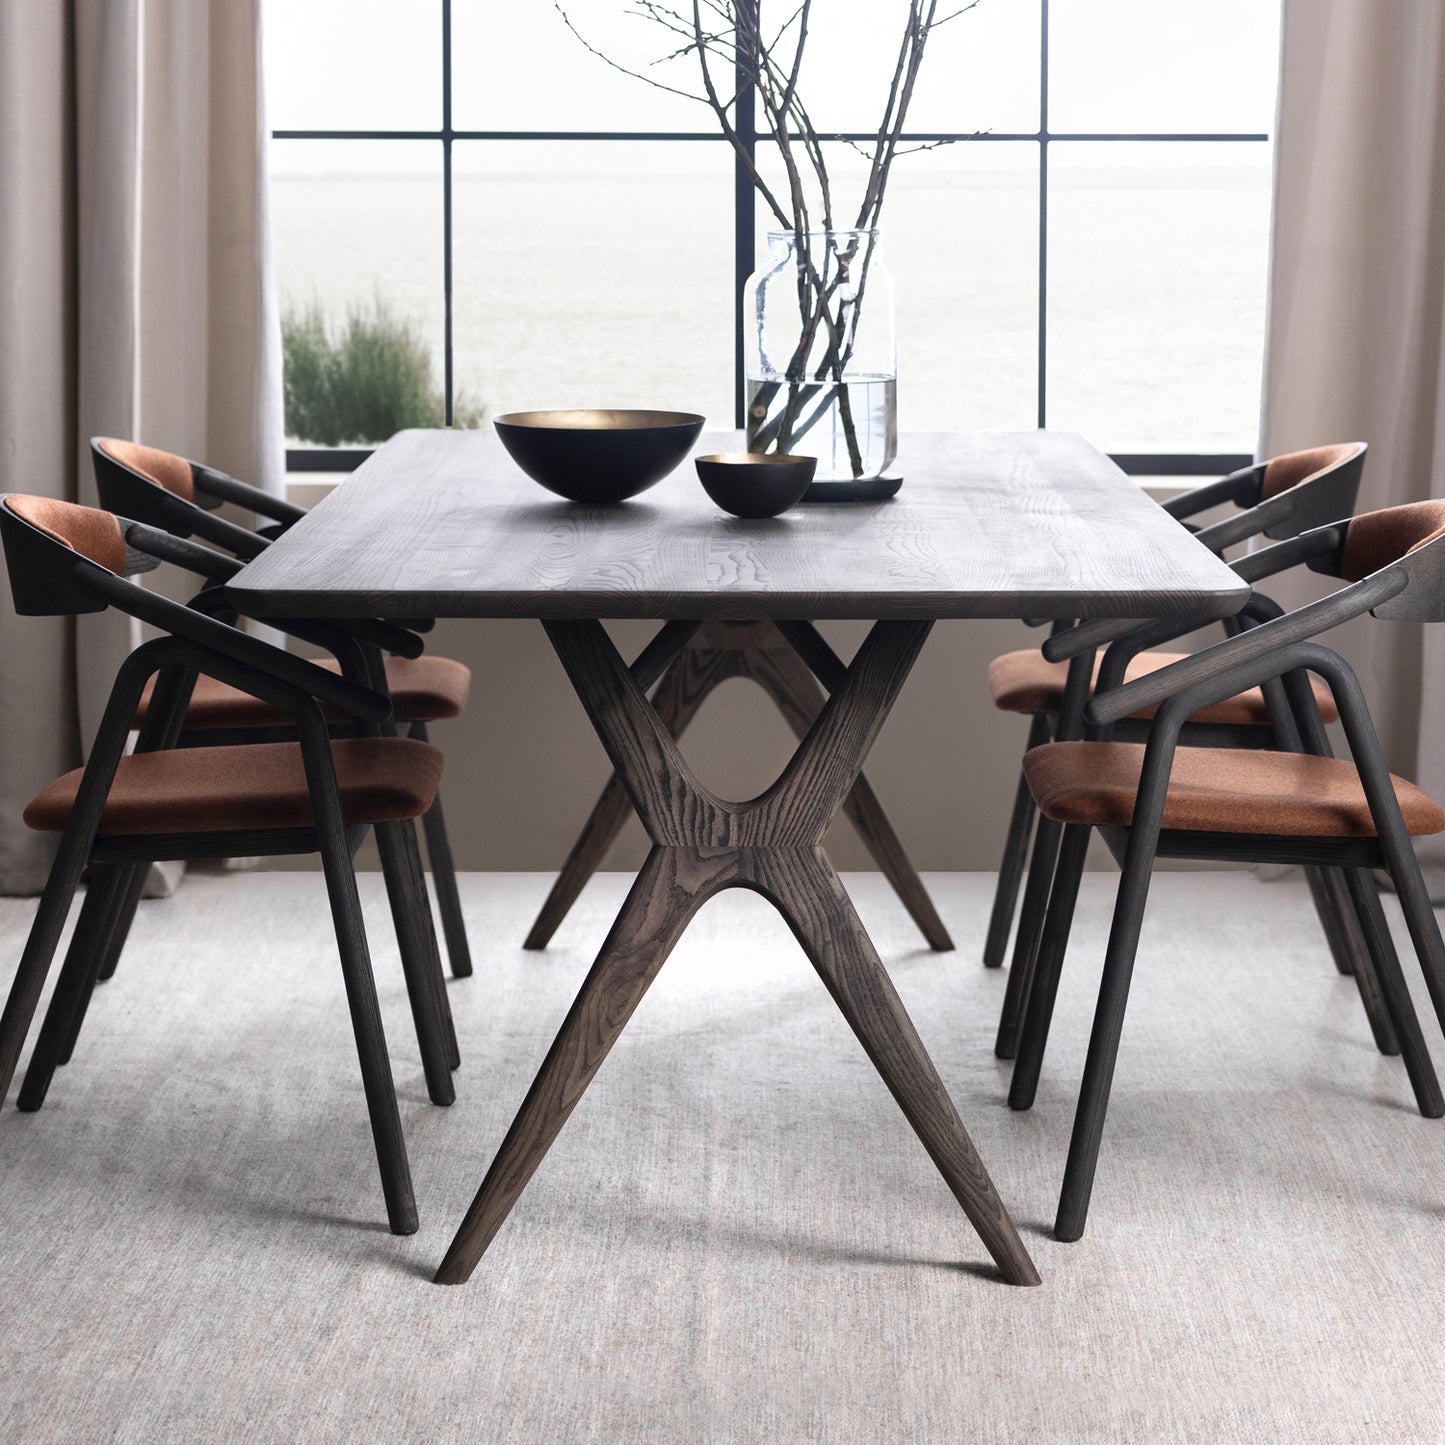 Rose Hill Ash Dining Table With Rounded Corners With Brass - 220cm Extending